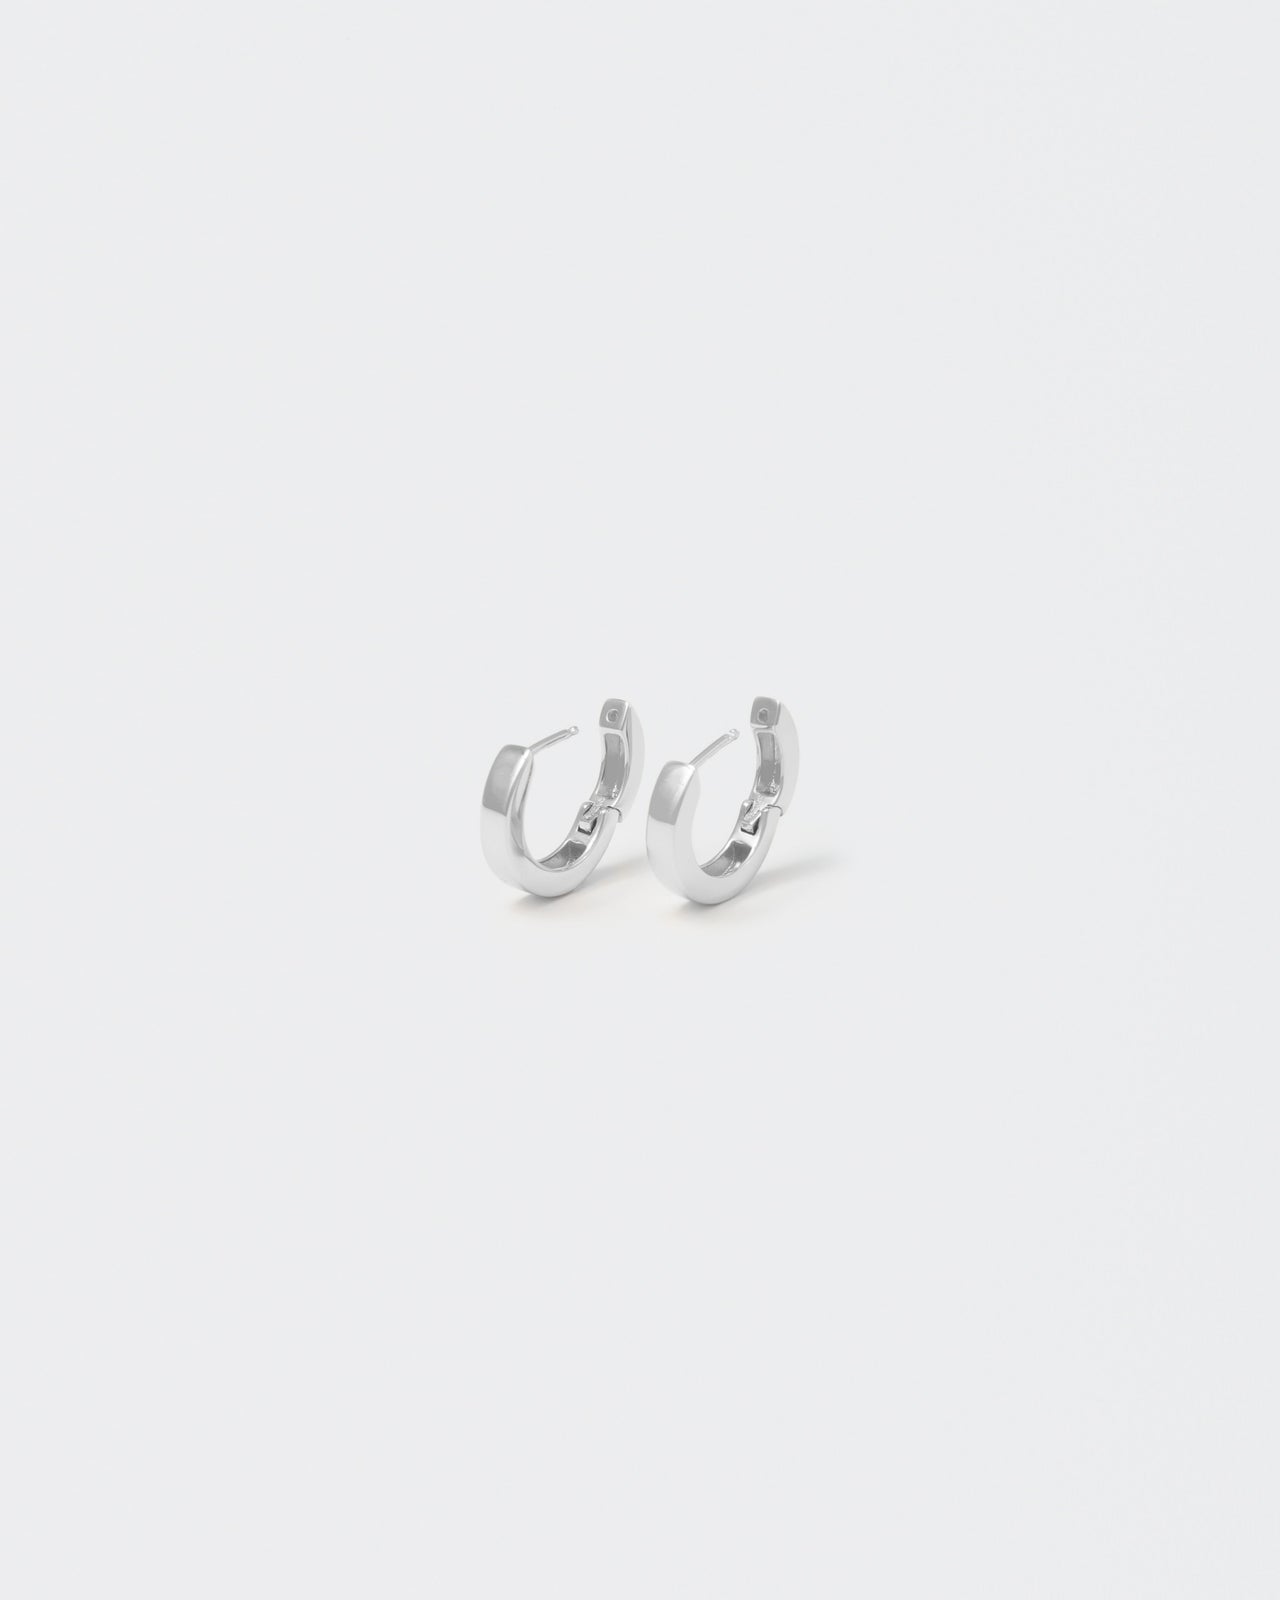 18k white gold coated hoop earrings with lasered logo and details on the inside